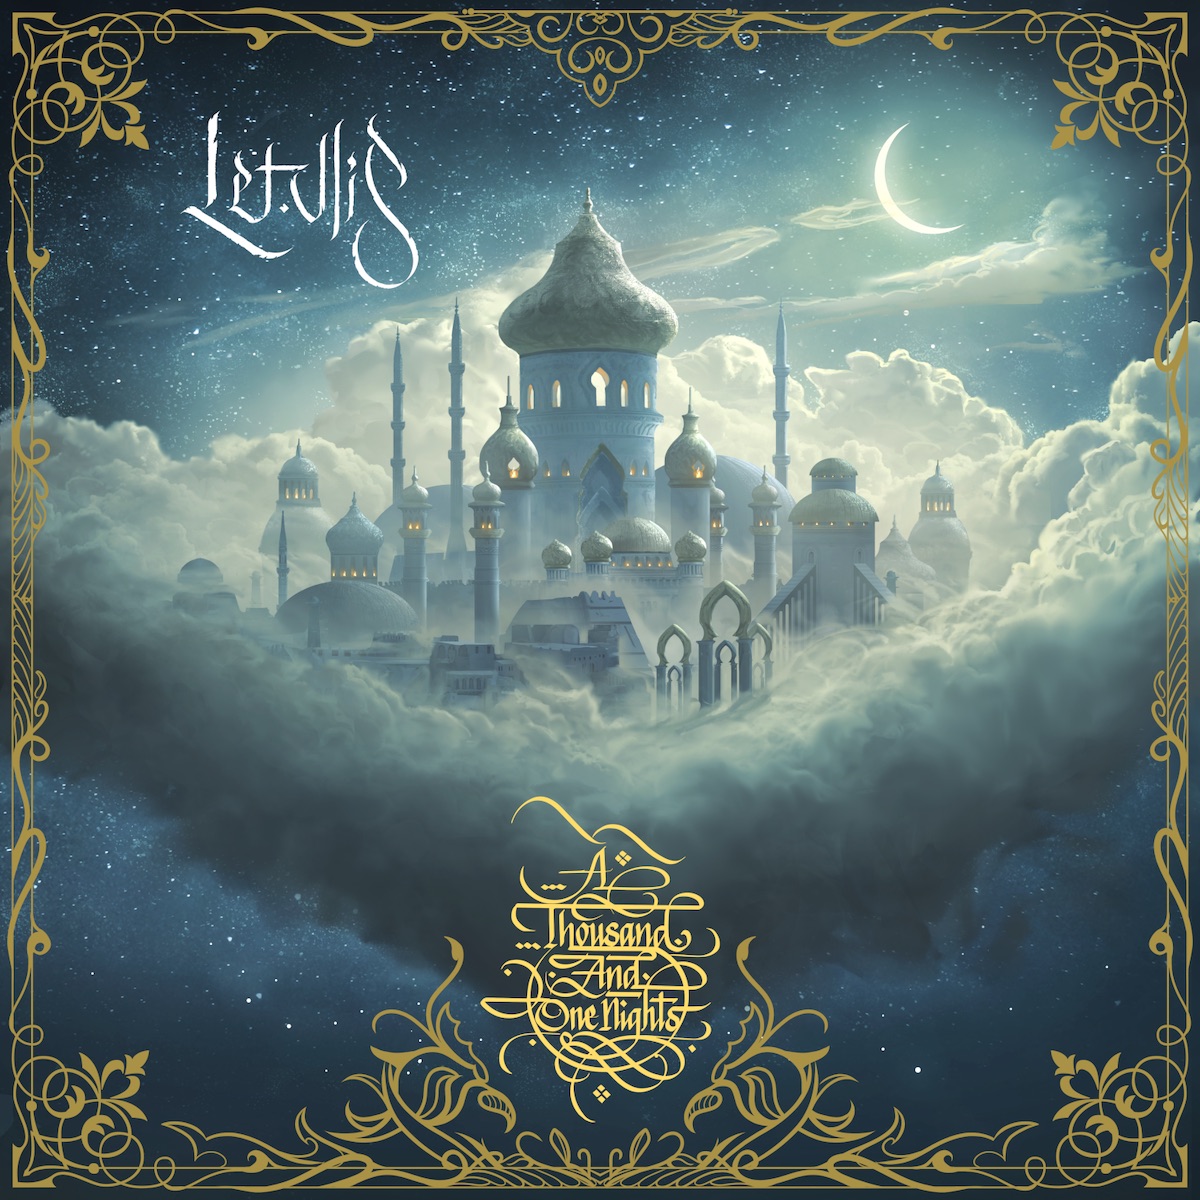 EP REVIEW: A Thousand And One Nights – Chapter 1 by by Letallis